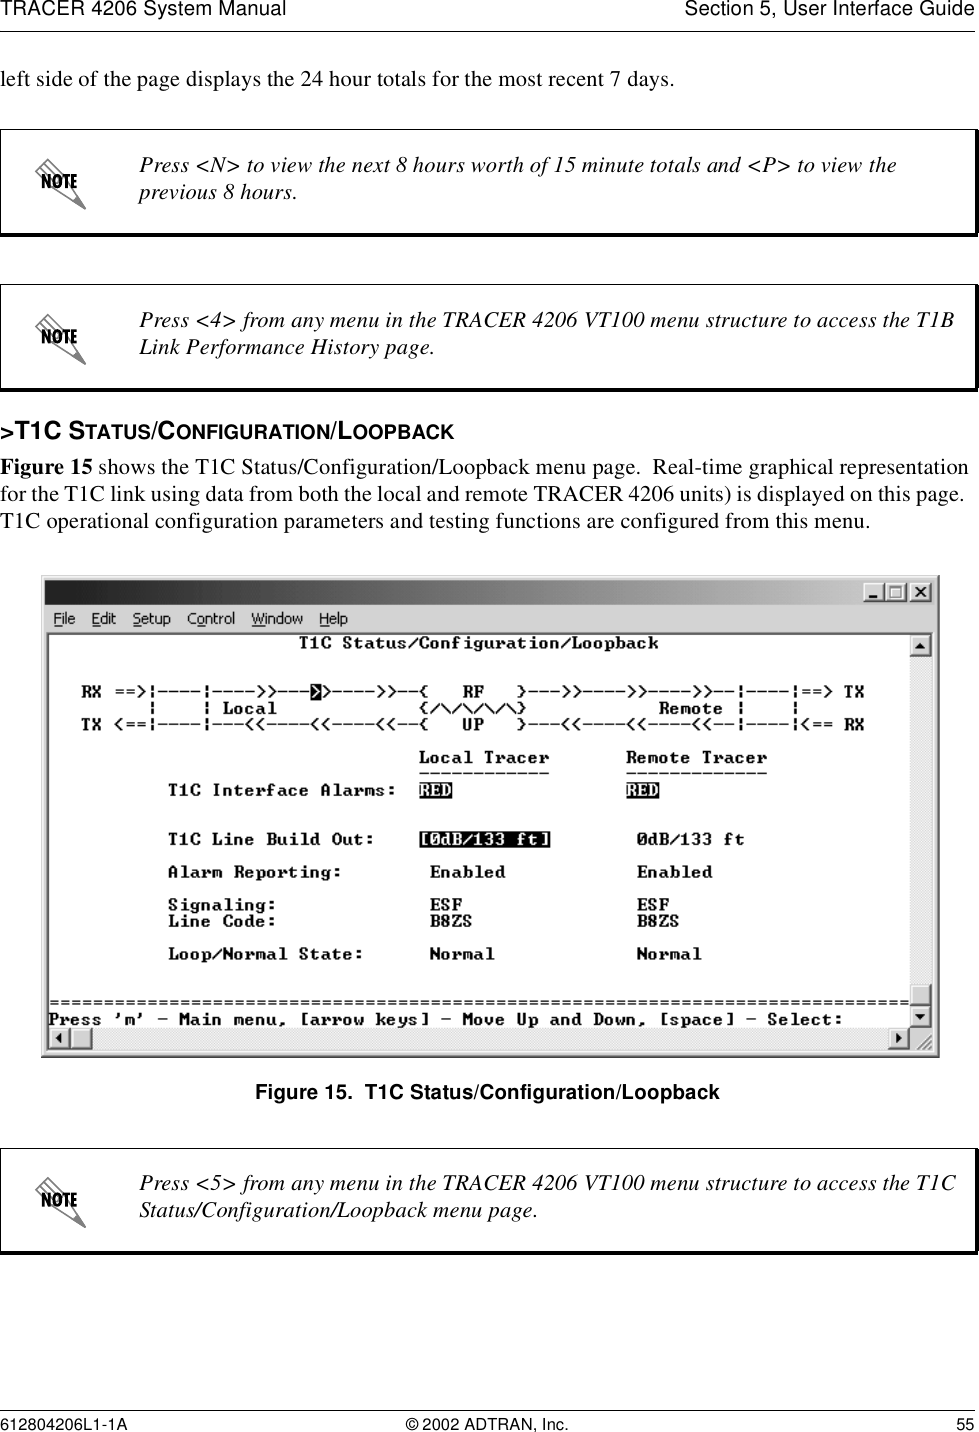 TRACER 4206 System Manual Section 5, User Interface Guide612804206L1-1A © 2002 ADTRAN, Inc. 55left side of the page displays the 24 hour totals for the most recent 7 days.&gt;T1C STATUS/CONFIGURATION/LOOPBACKFigure 15 shows the T1C Status/Configuration/Loopback menu page.  Real-time graphical representation for the T1C link using data from both the local and remote TRACER 4206 units) is displayed on this page.  T1C operational configuration parameters and testing functions are configured from this menu.Figure 15.  T1C Status/Configuration/LoopbackPress &lt;N&gt; to view the next 8 hours worth of 15 minute totals and &lt;P&gt; to view the previous 8 hours.Press &lt;4&gt; from any menu in the TRACER 4206 VT100 menu structure to access the T1B Link Performance History page.Press &lt;5&gt; from any menu in the TRACER 4206 VT100 menu structure to access the T1C Status/Configuration/Loopback menu page.